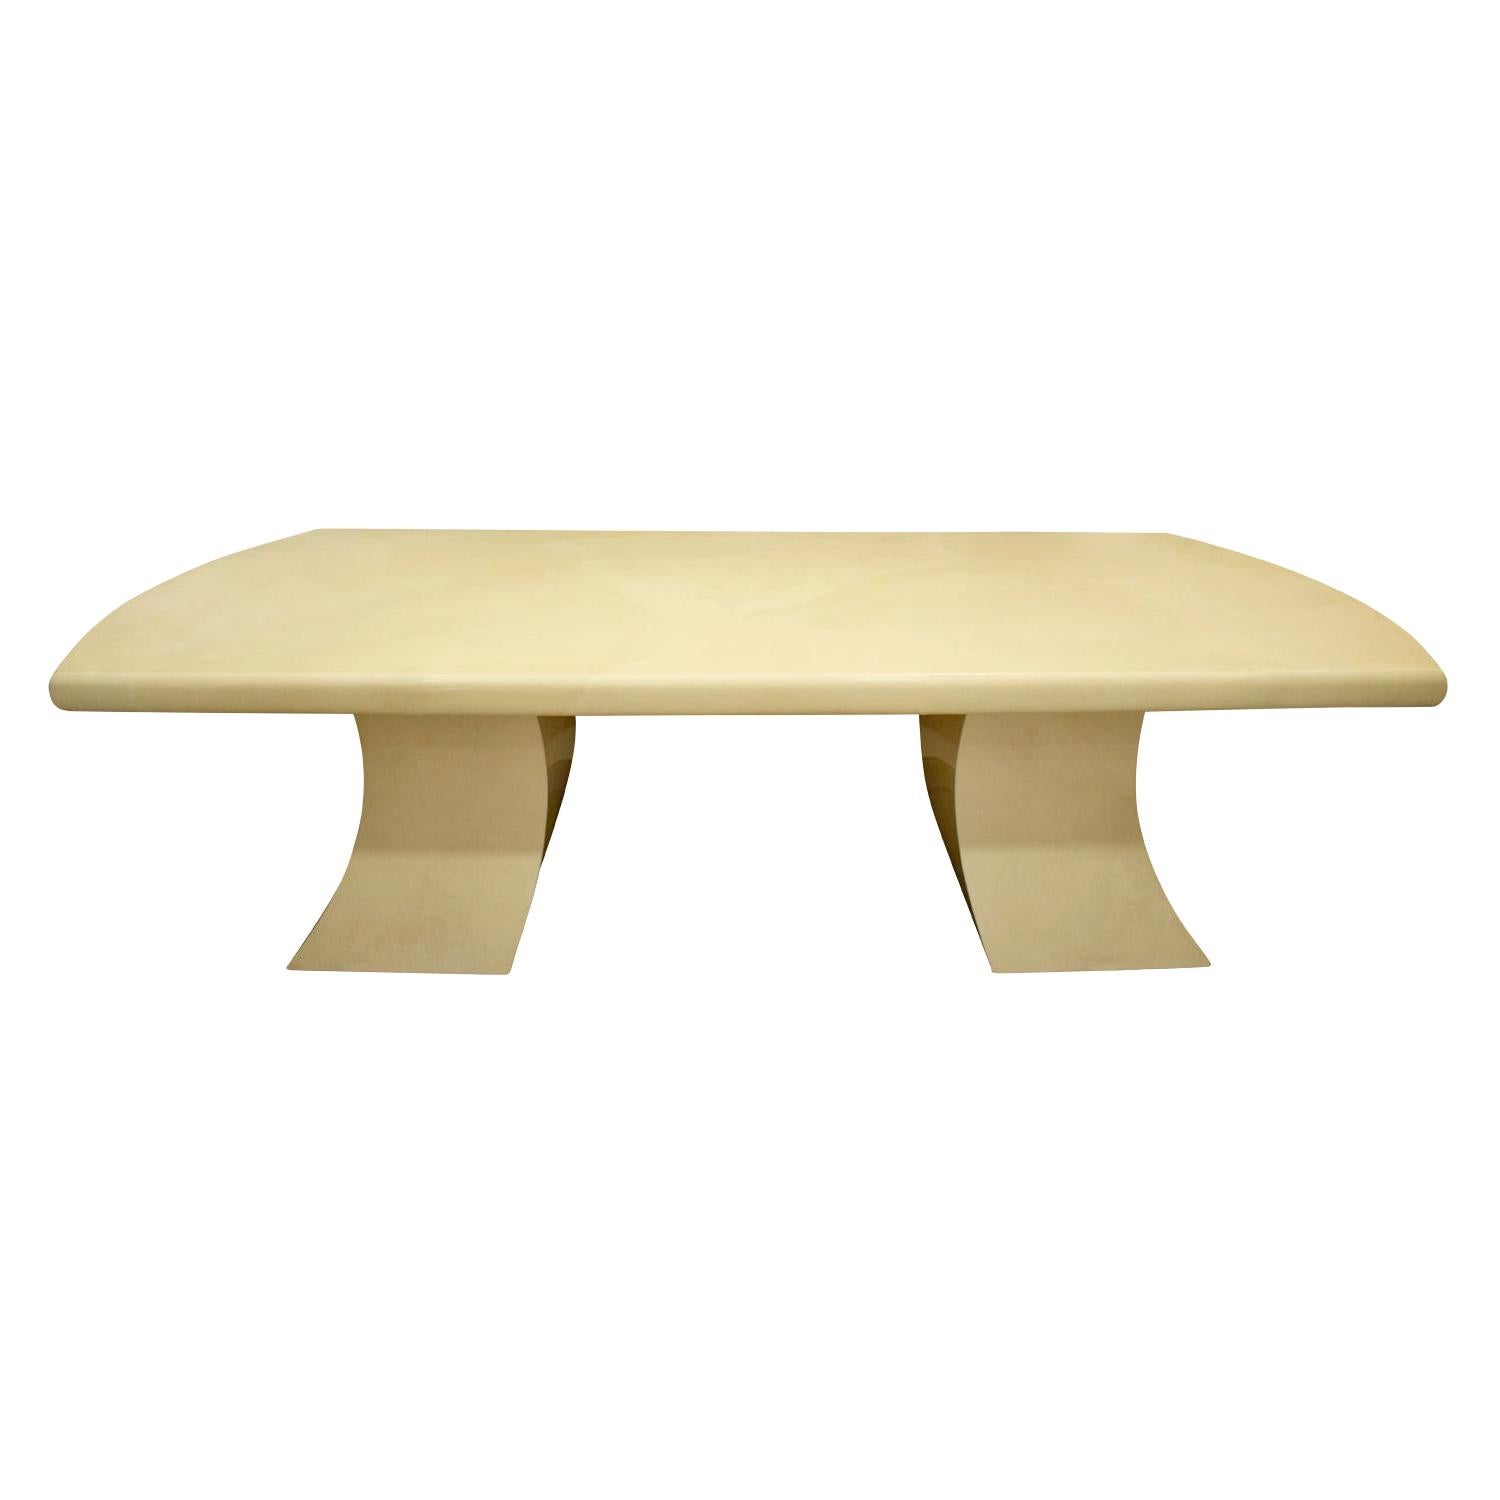 Karl Springer "Pagoda Style Dining Table" in Lacquered Goatskin, 1980s For Sale